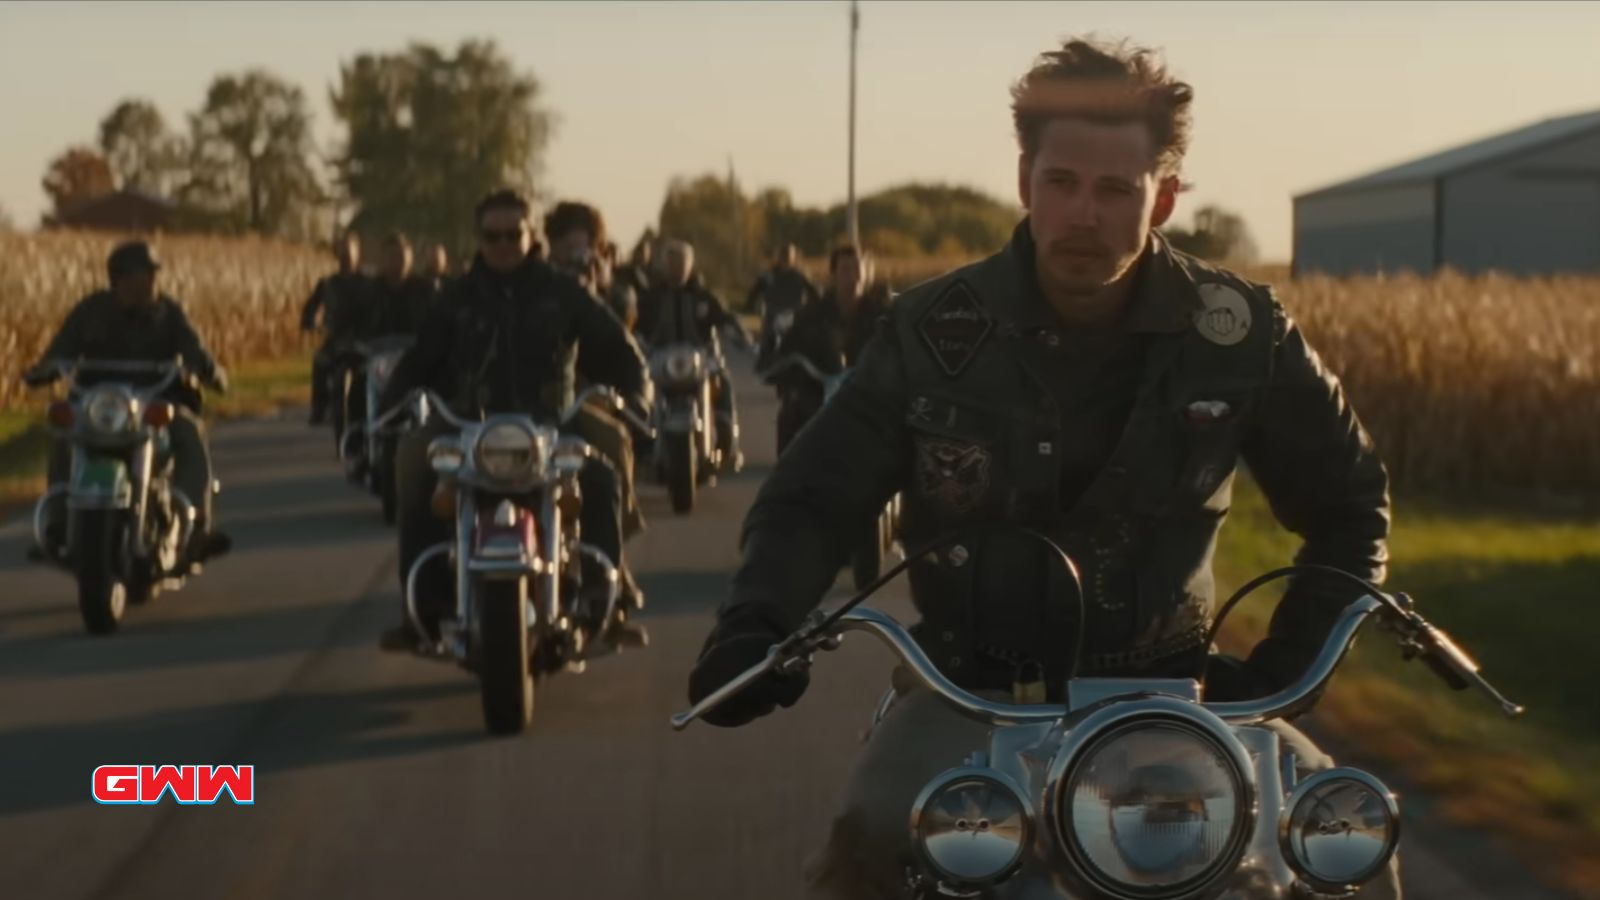  Benny riding with other members of the motorcycle club, The Bikeriders Trailer